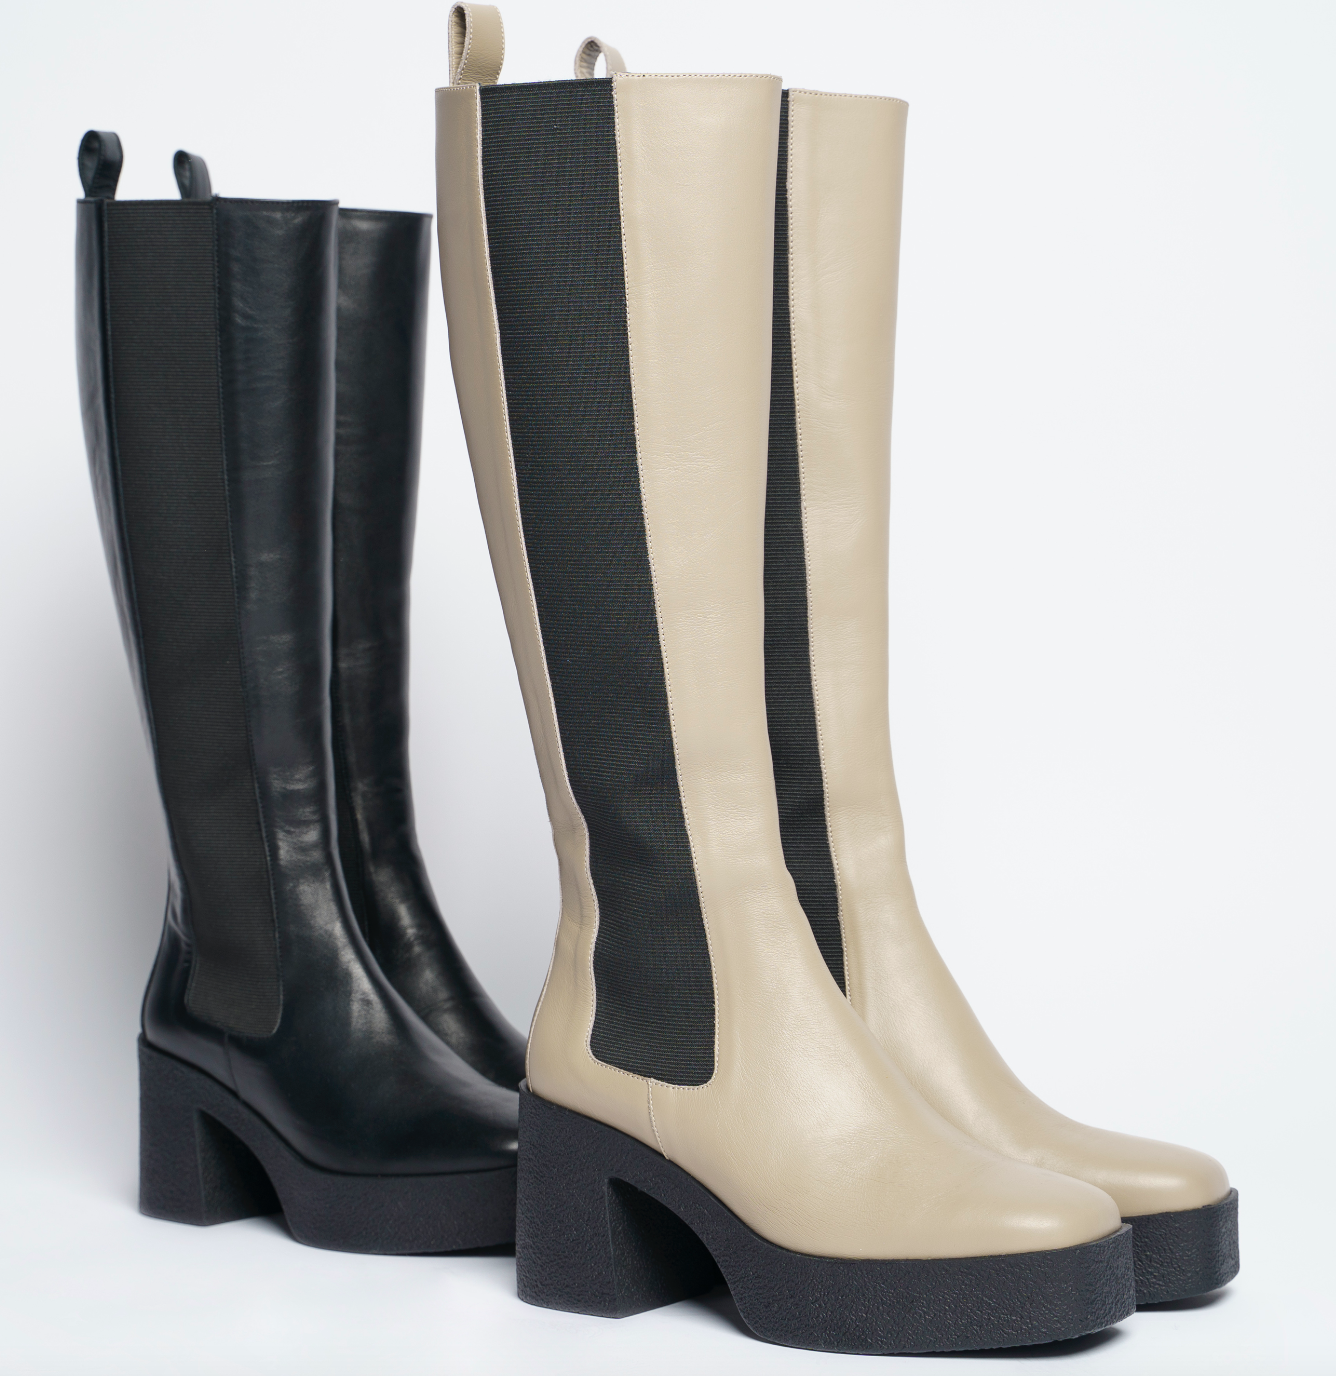 Momoko Taupe Knee-High Leather Chelsea Boots 20077-05-02 -8